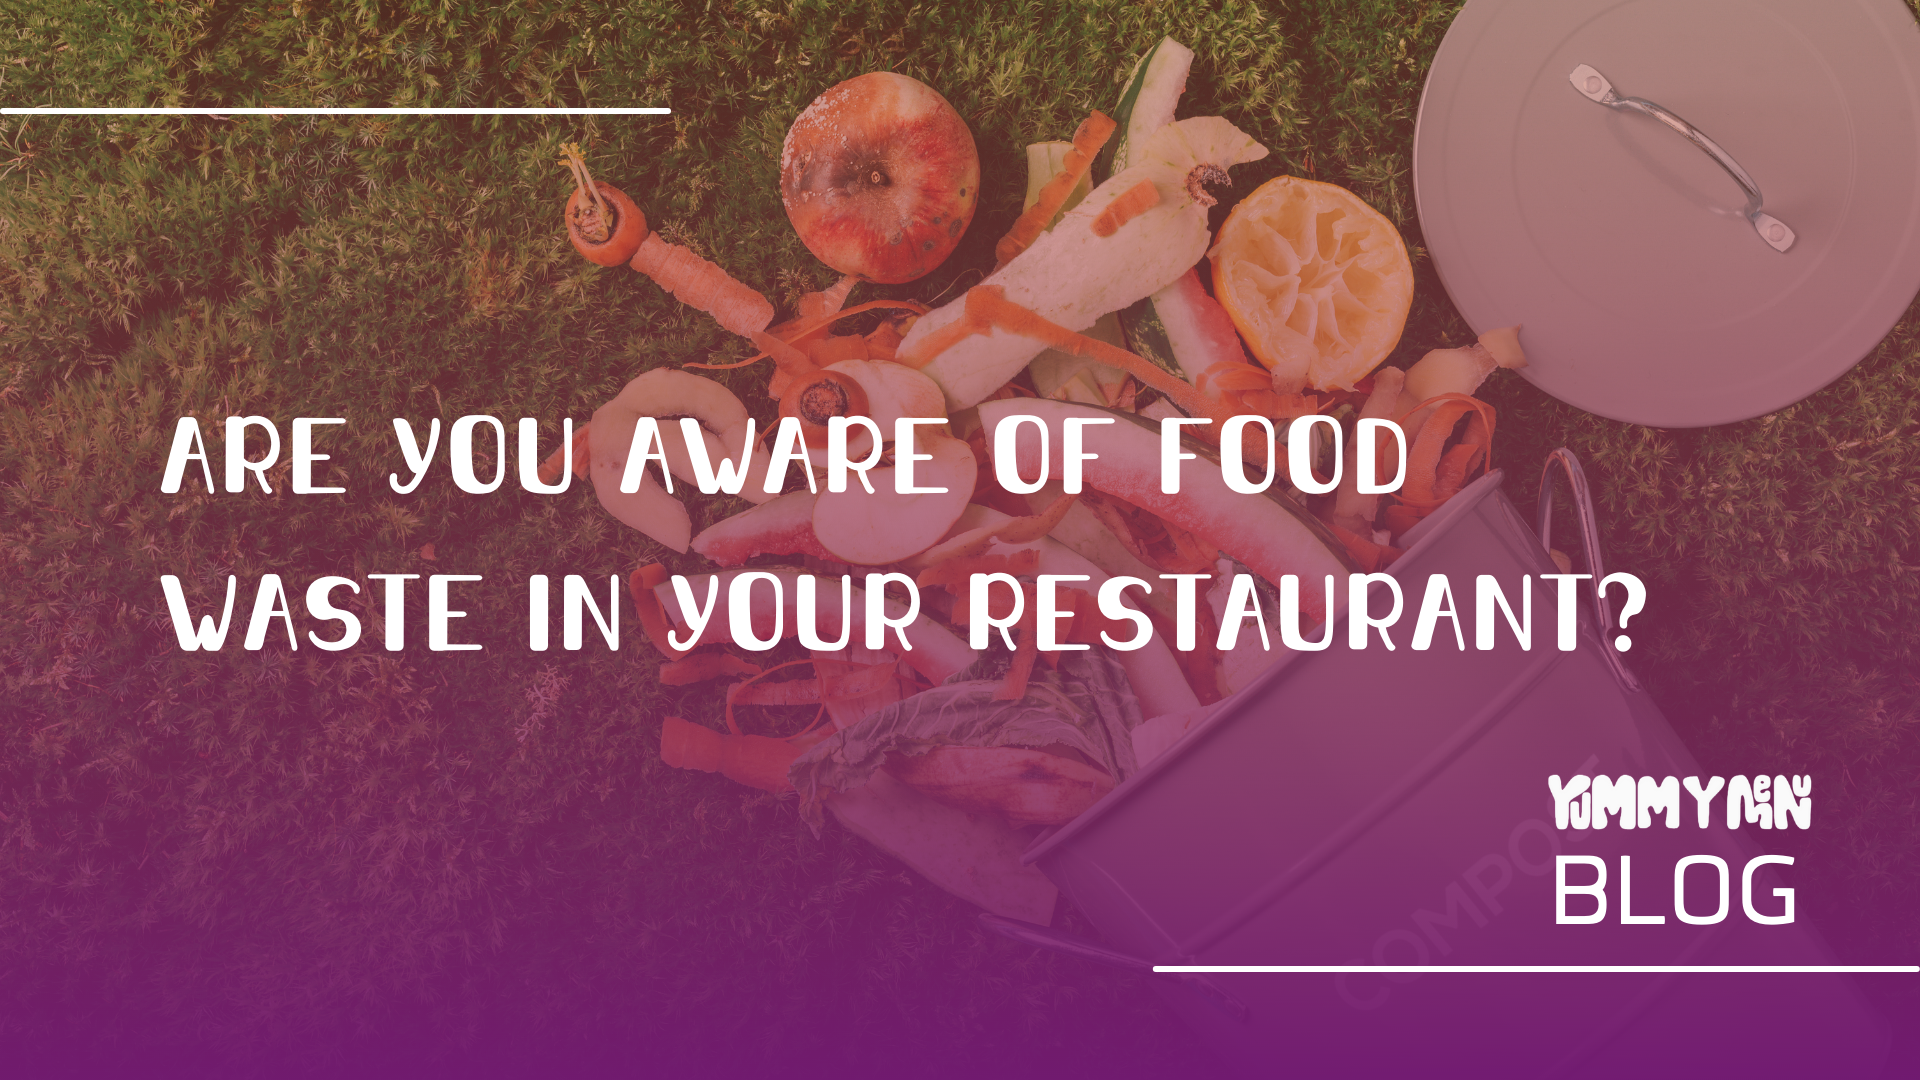 Are You Aware of Food Waste in Your Restaurant?